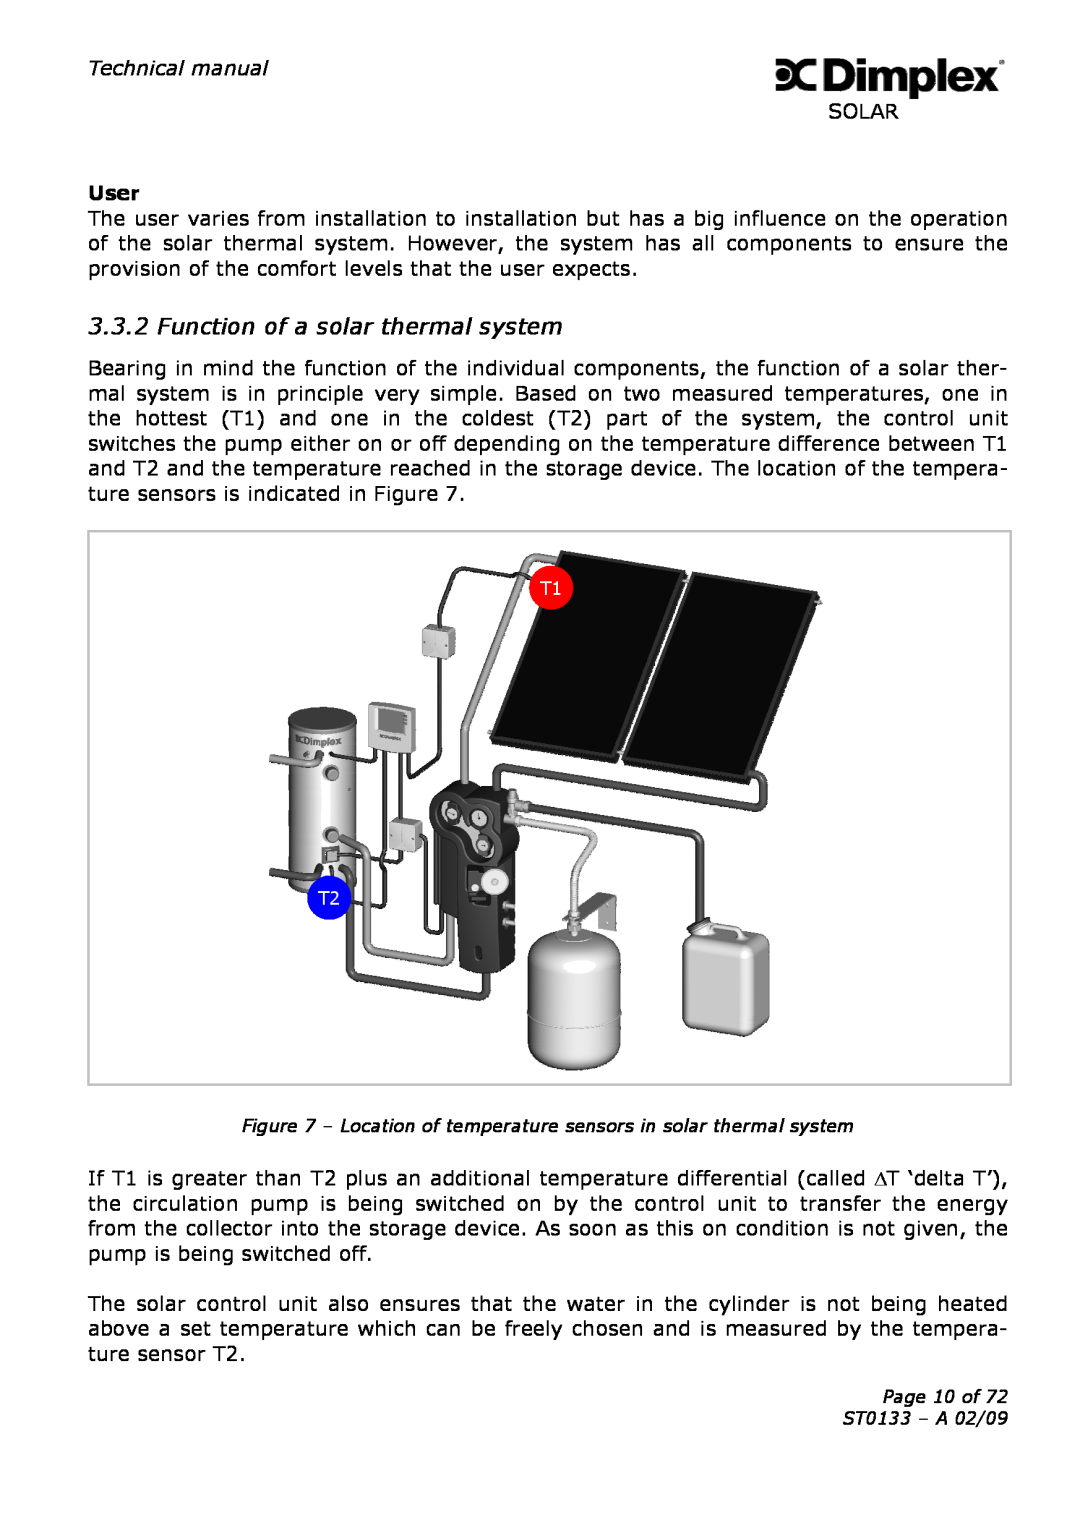 Dimplex ST0133 technical manual Function of a solar thermal system, User 